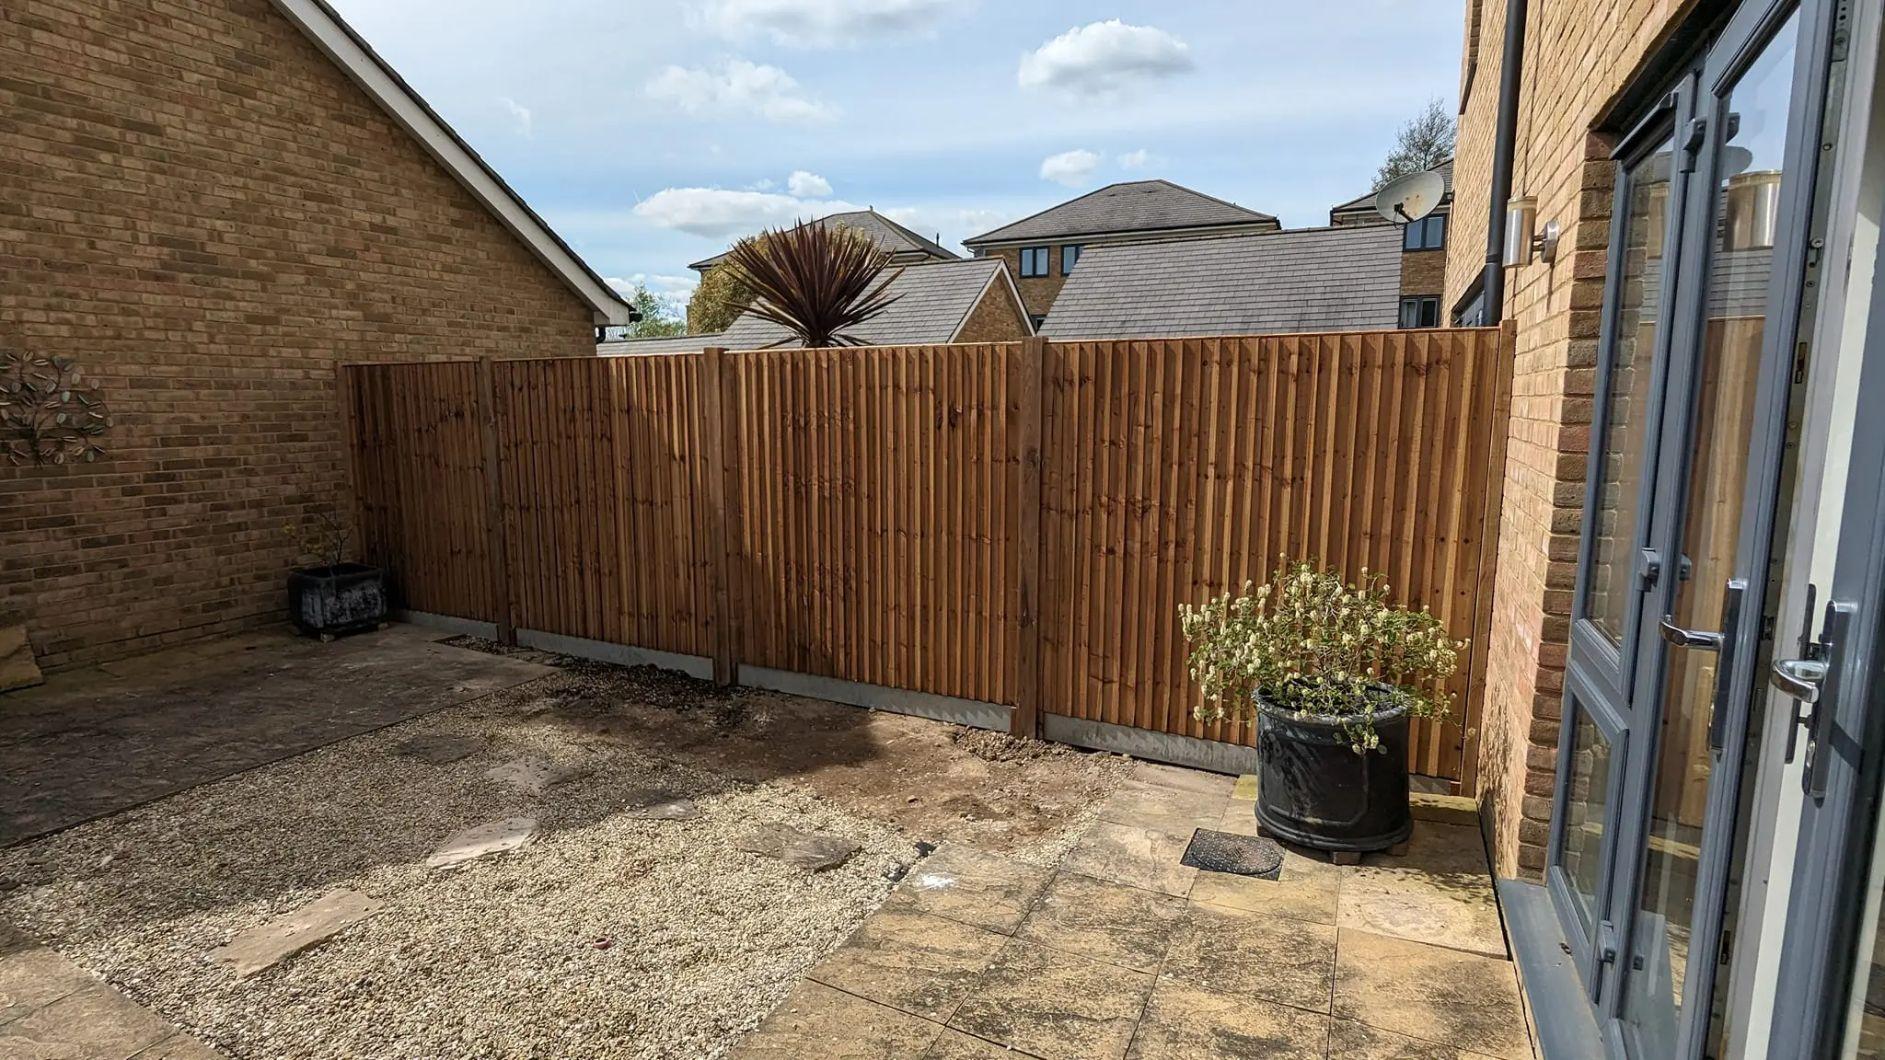 The Fencing Company Questions